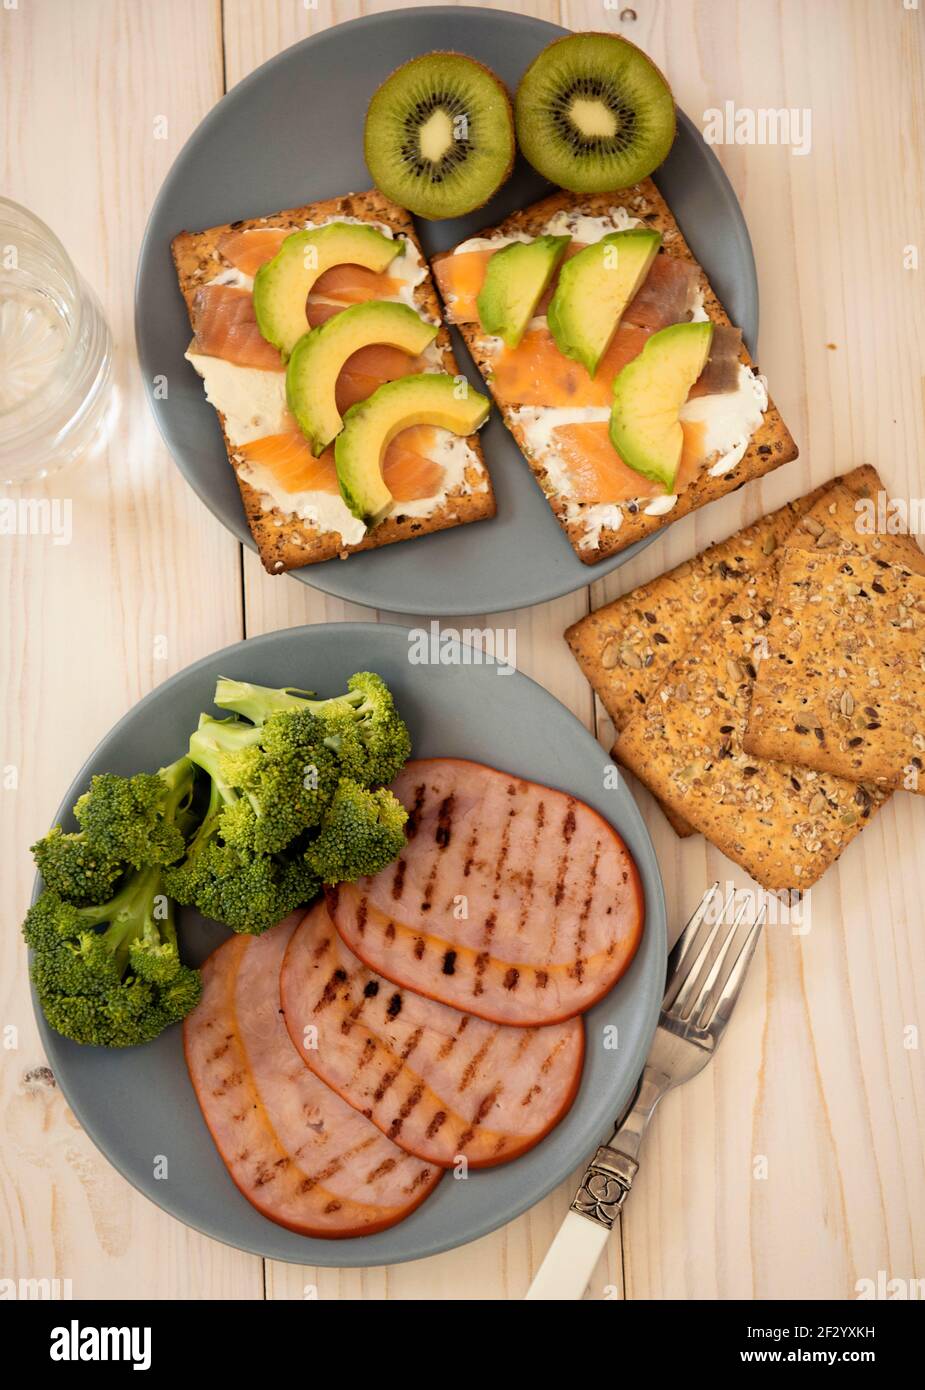 Healthy food for weight loss Stock Photo